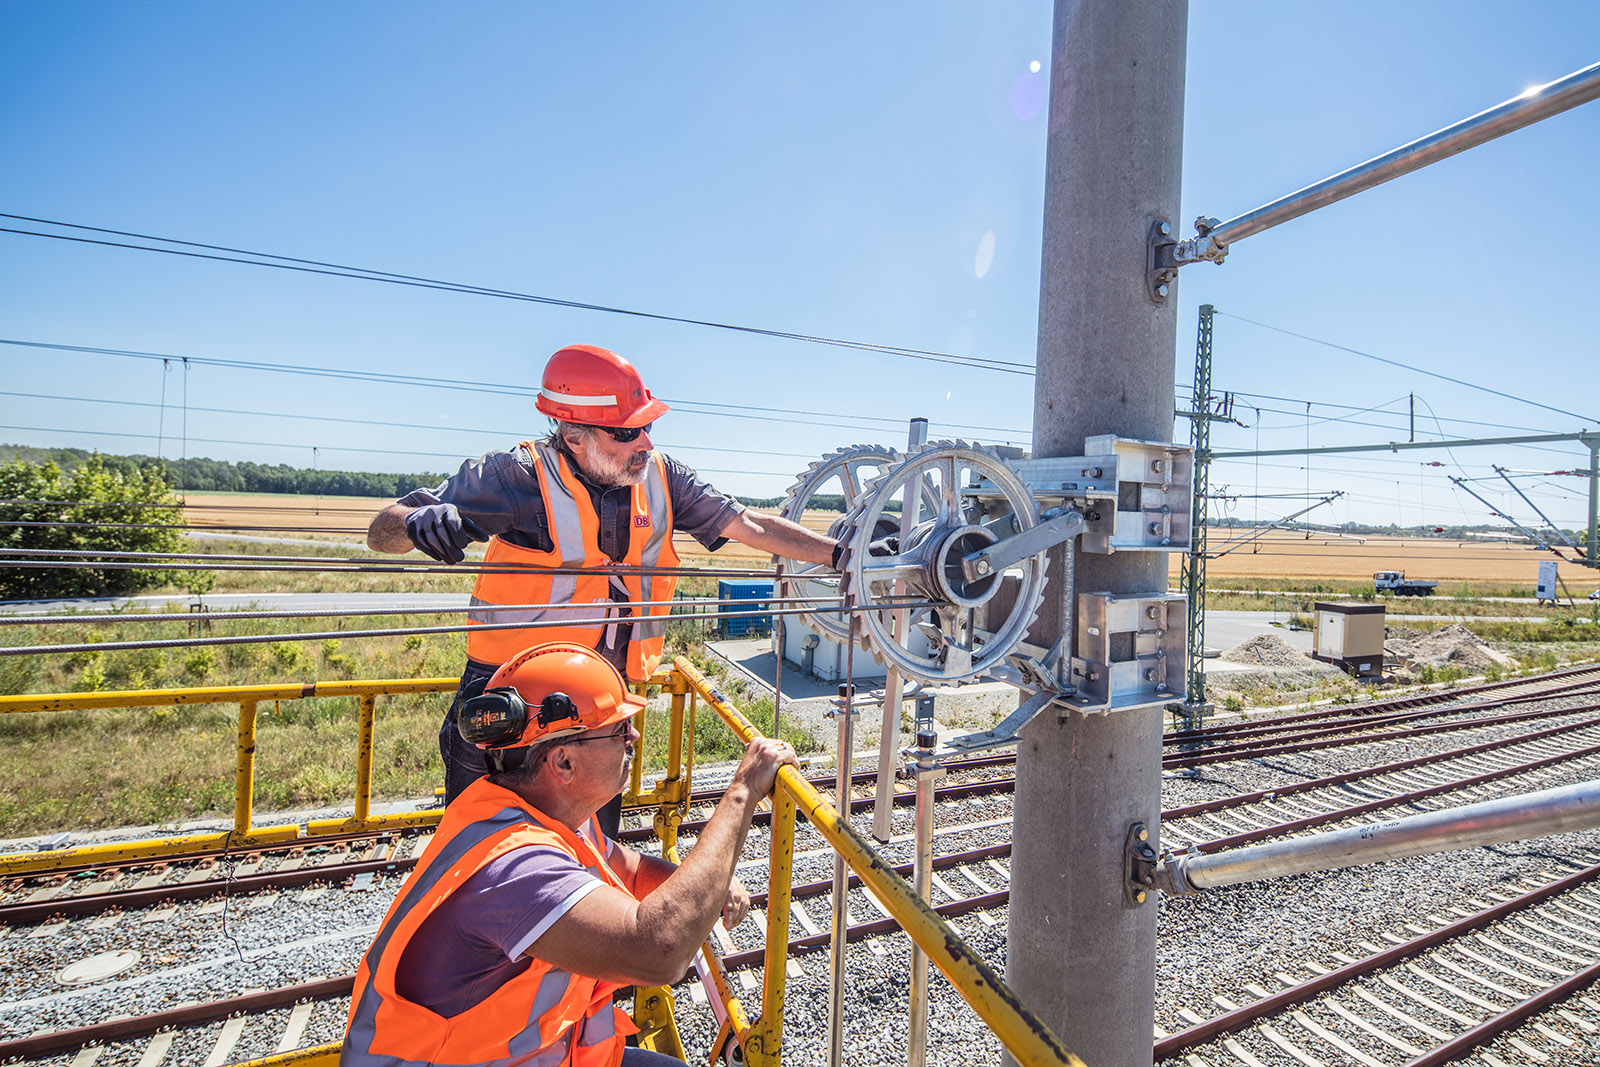 Engineers check the tensioning device of the new overhead line system